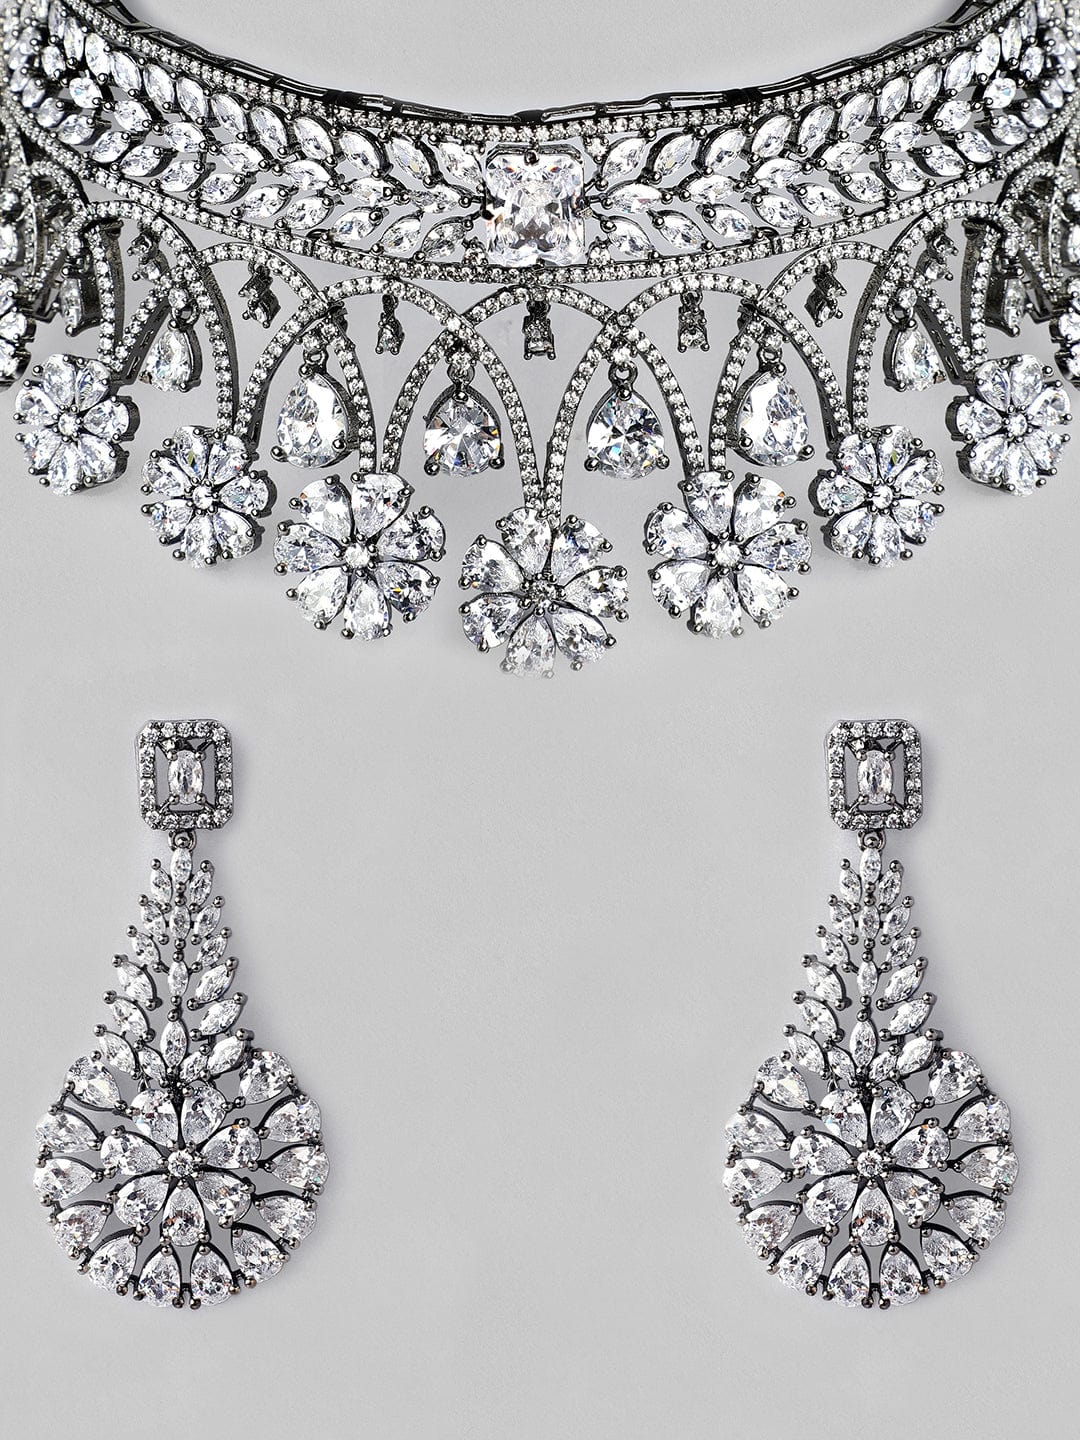 Rubans Luxury Oxidised Silver-Plated White AD-Studded Handcrafted Jewellery Set Necklace Set